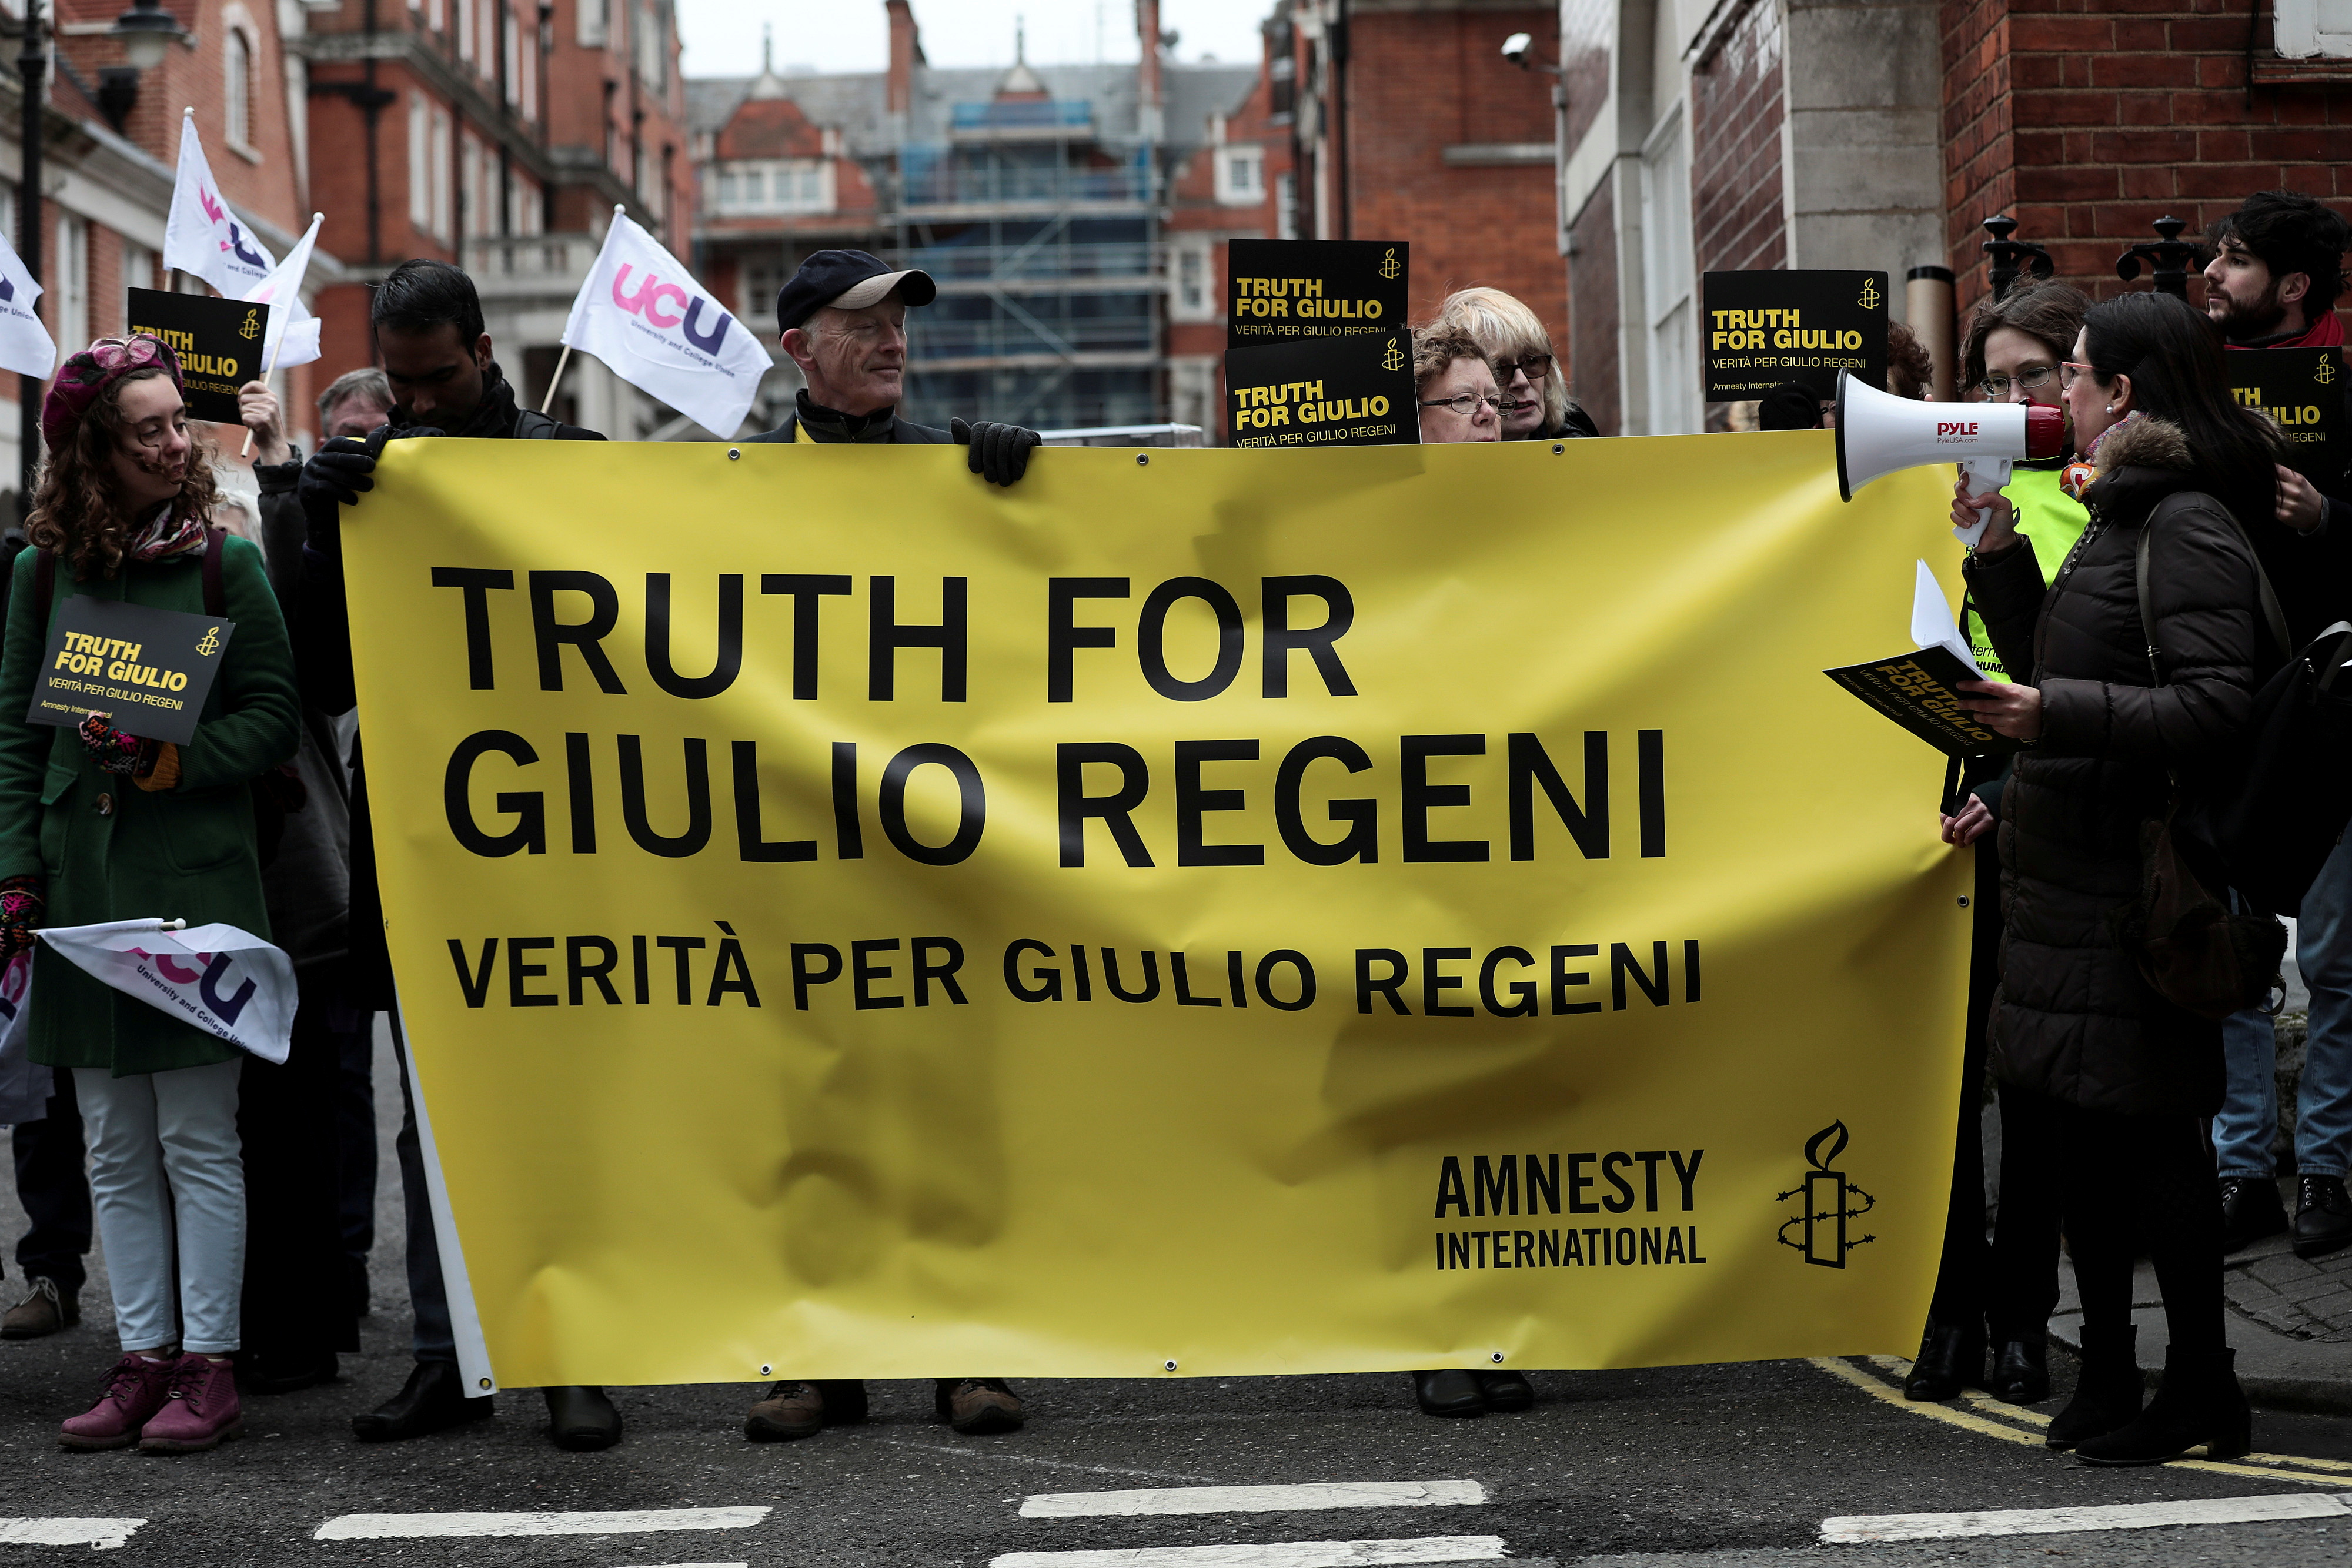 Demonstrators from Amnesty International hold placards outside the Egyptian embassy in support of Giulio Regeni, who was found murdered in Cairo two years ago, in London, Britain, February 2, 2018. REUTERS/Simon Dawson/File Photo